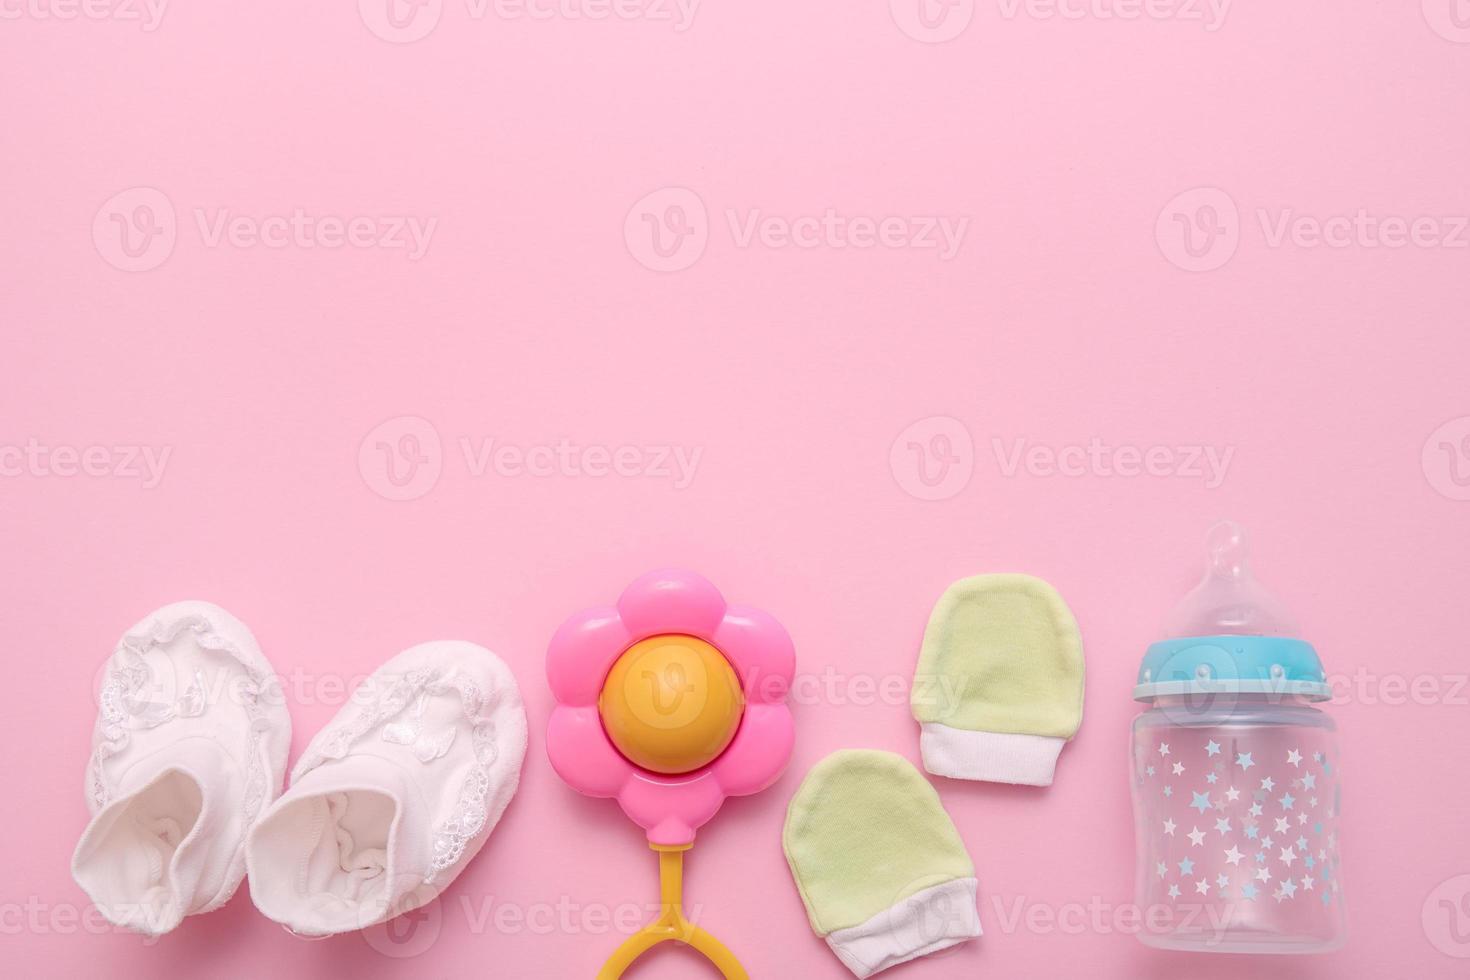 accessories for a newborn - booties, a rattle, a mitten, a bottle for mixture on a pink background with copy space photo